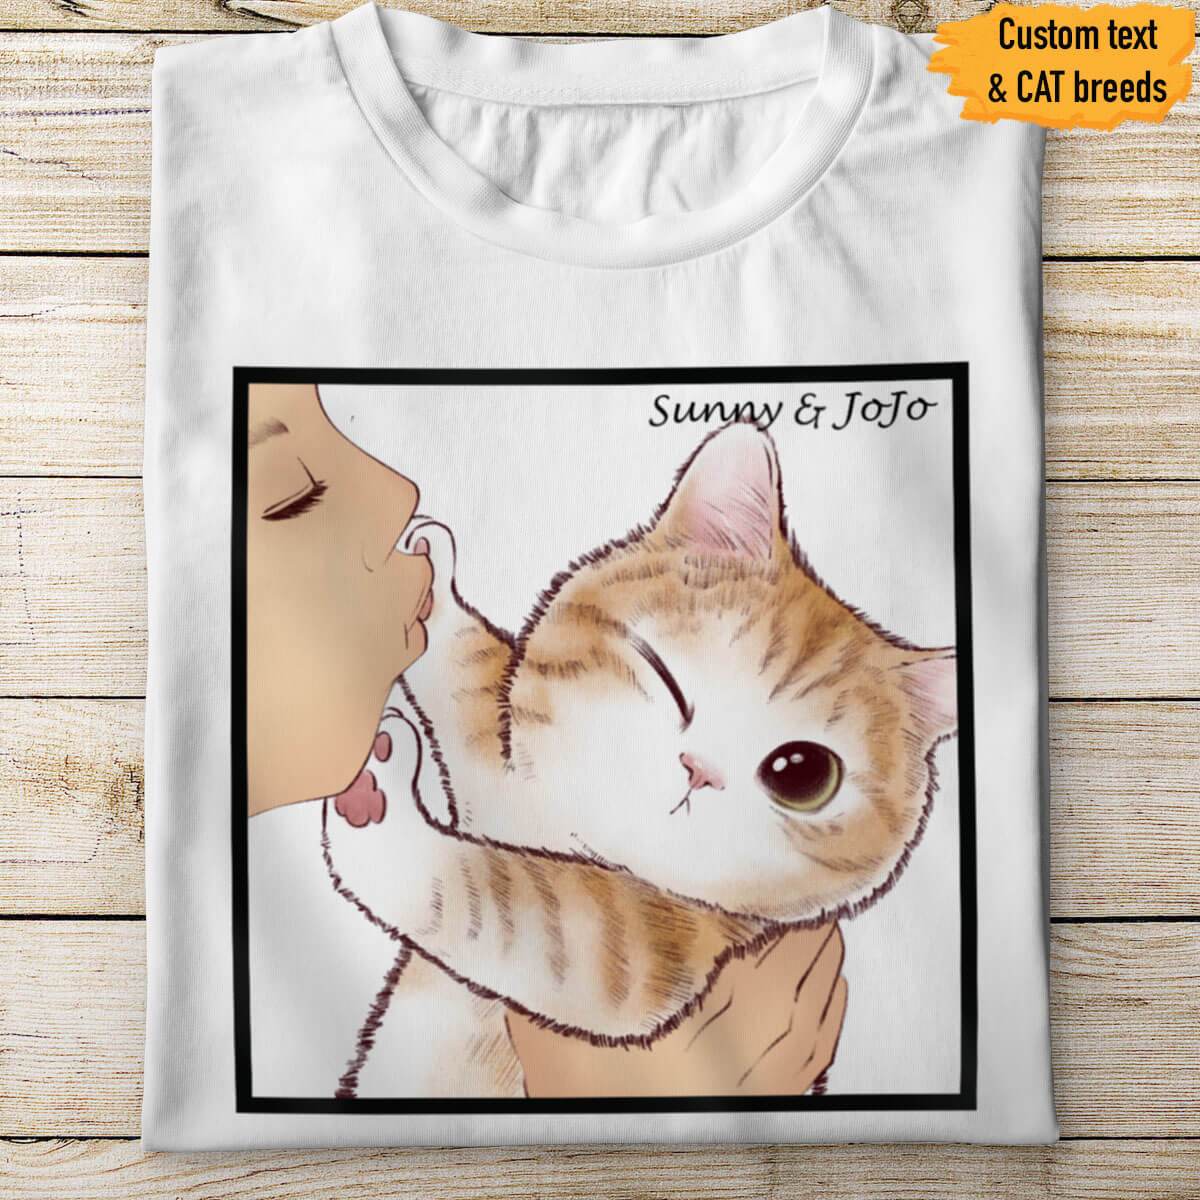 GeckoCustom Personalized Shirt For Cat Lover, Cat Mom Dad Kissed Cute Shirt